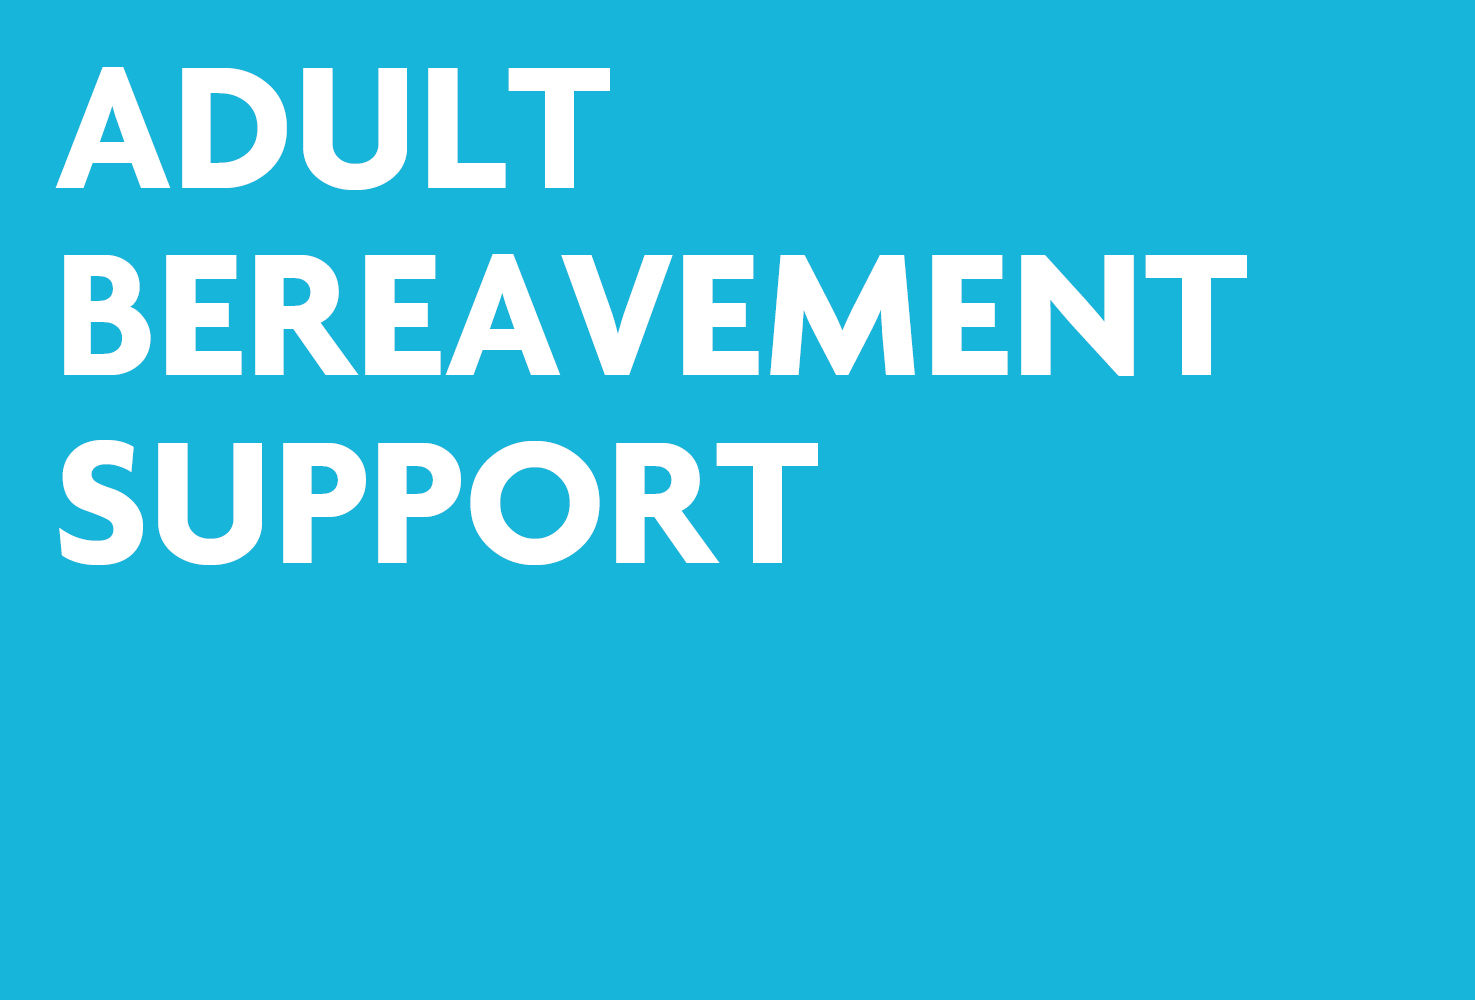 Adult Bereavement Support